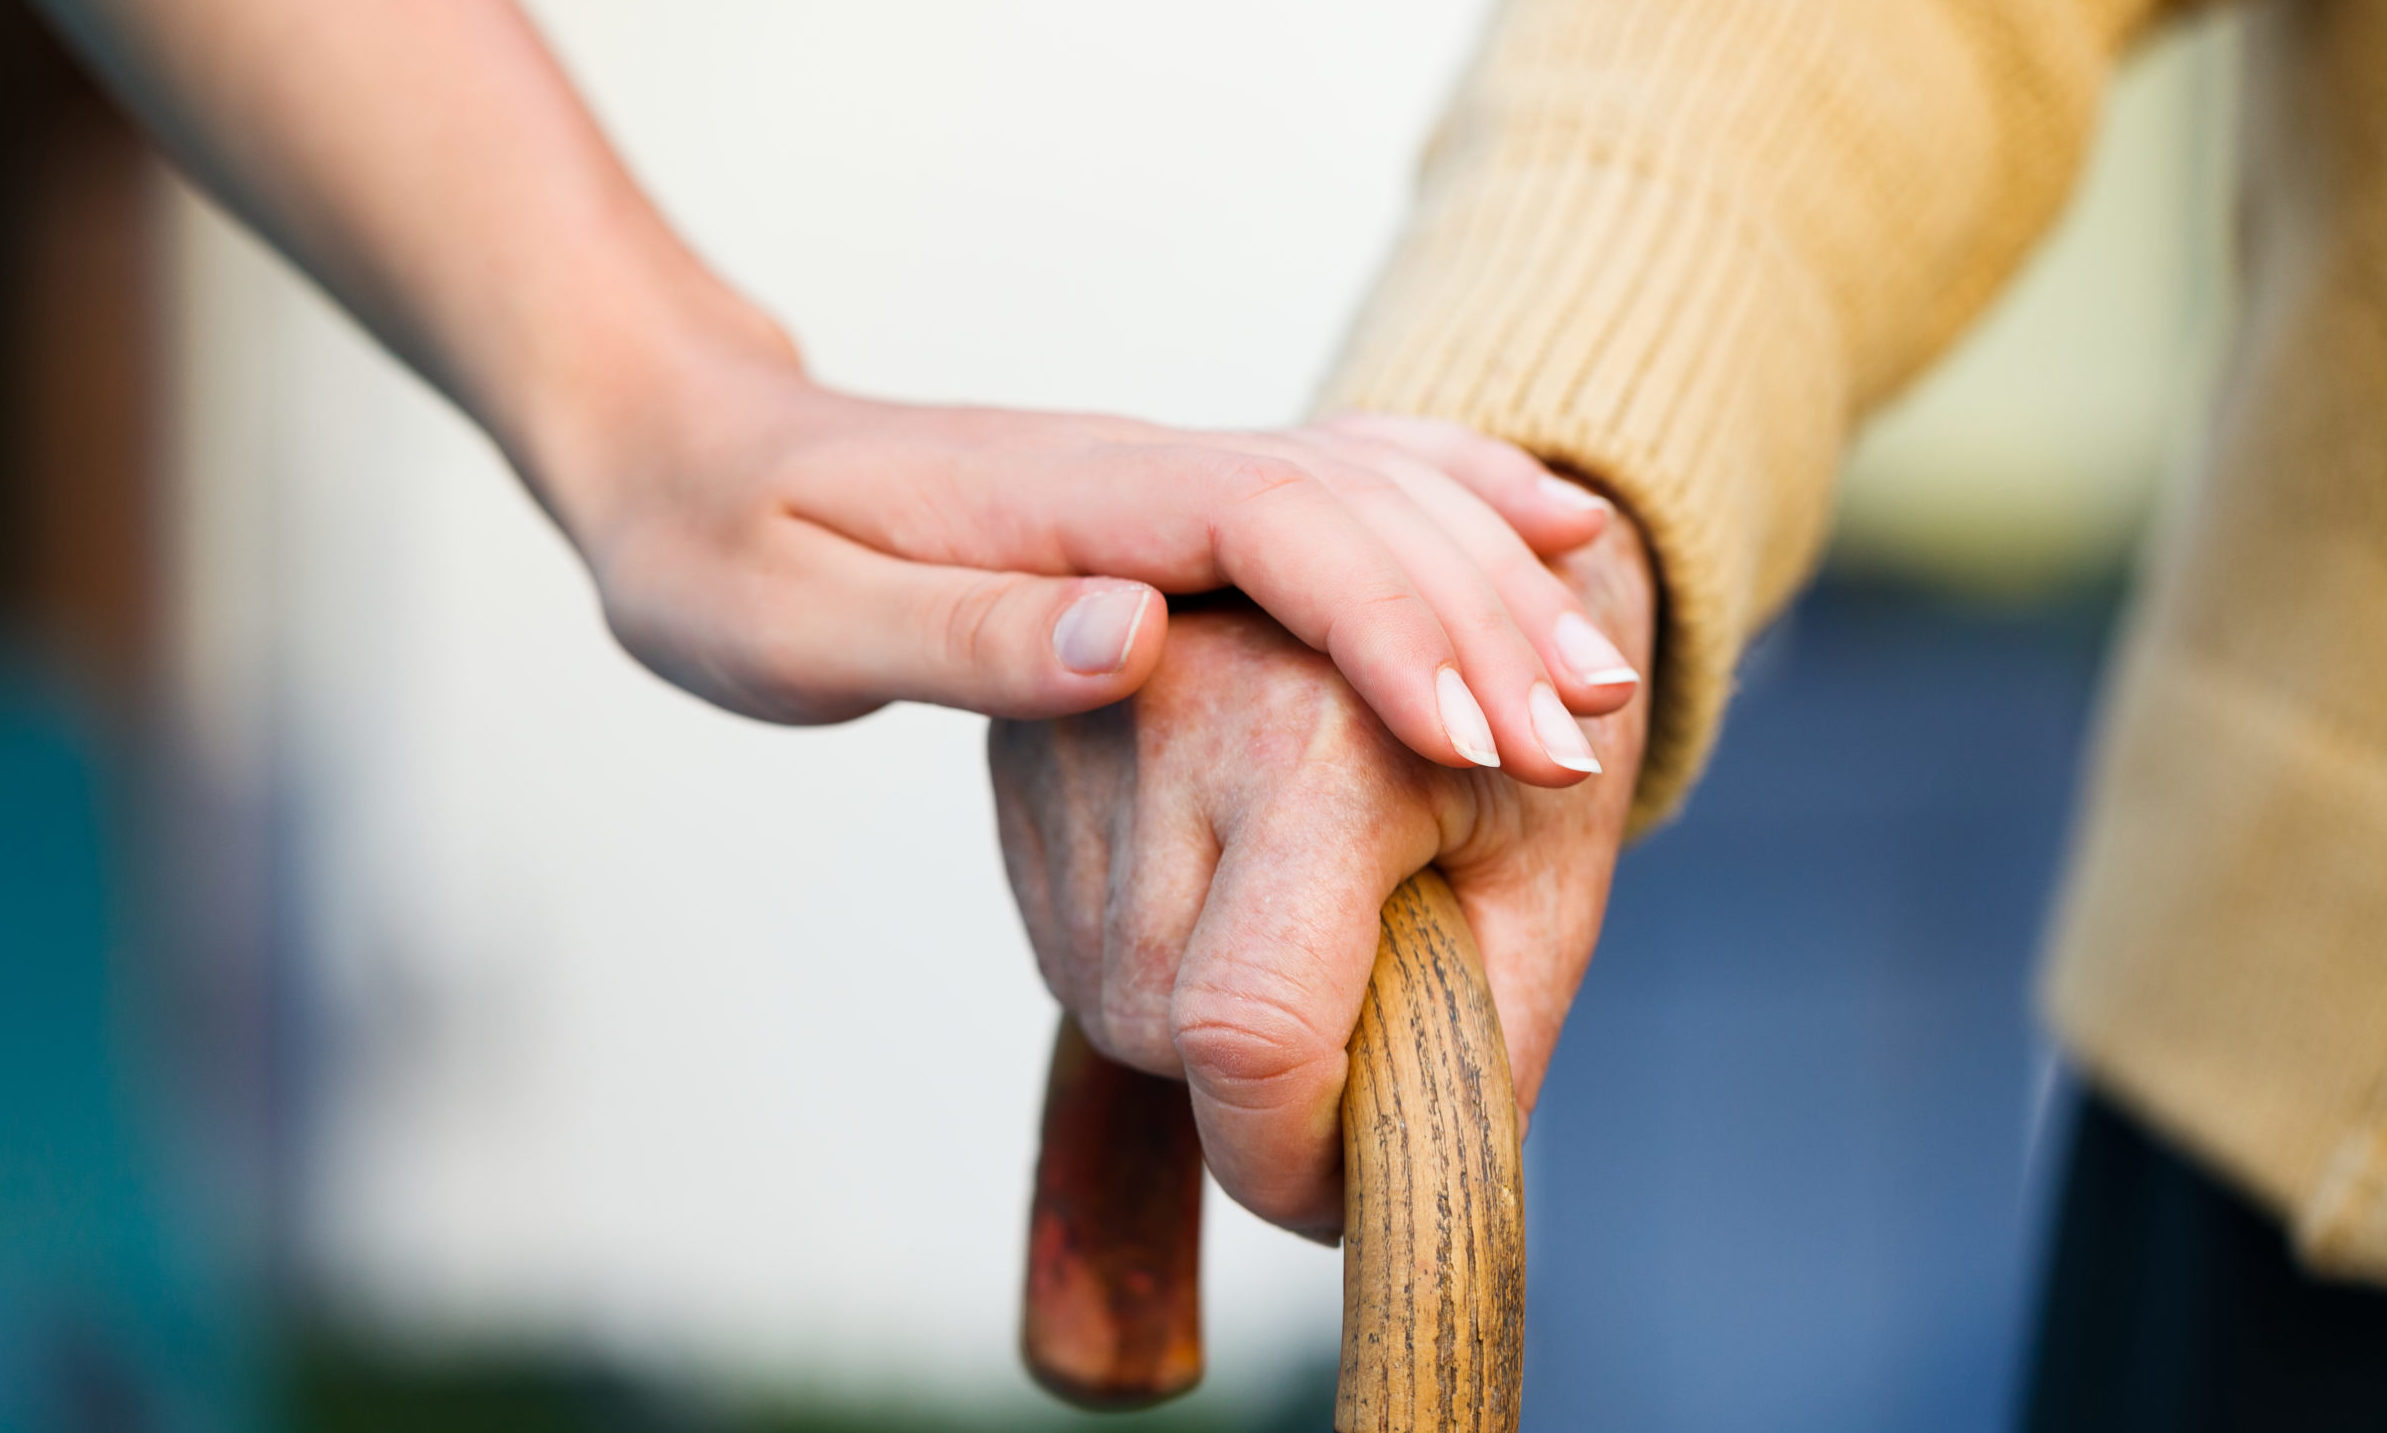 The care sector says it is already facing a recruitment crisis.